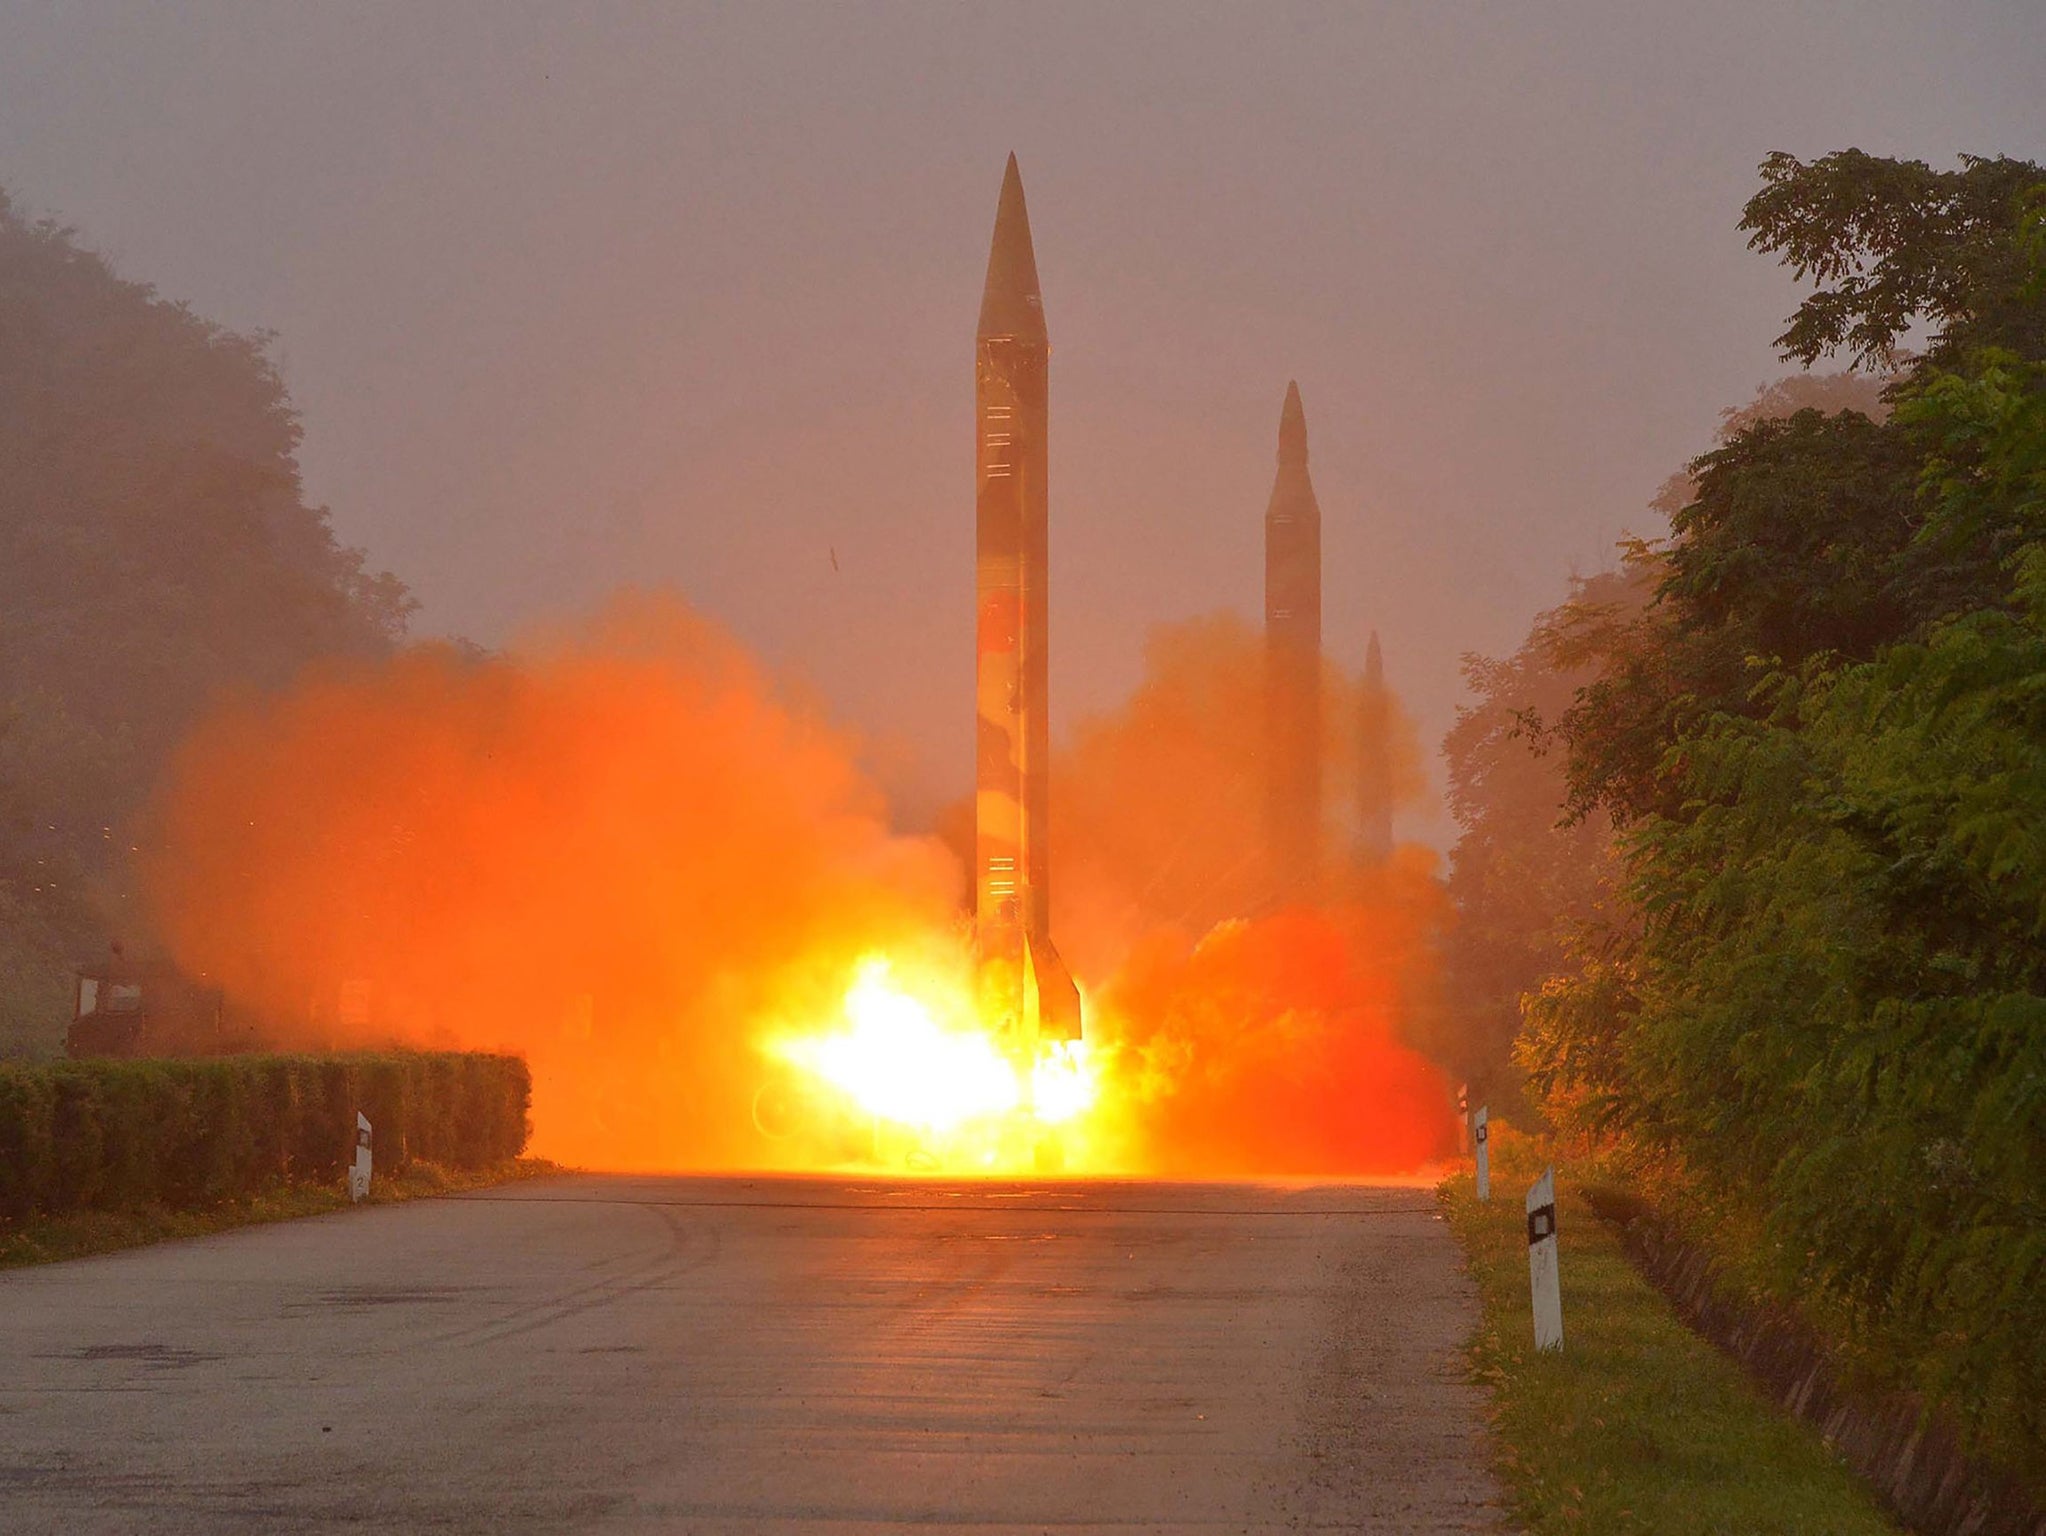 North Korea have reportedly fired a ballistic missile towards the Sea of Japan